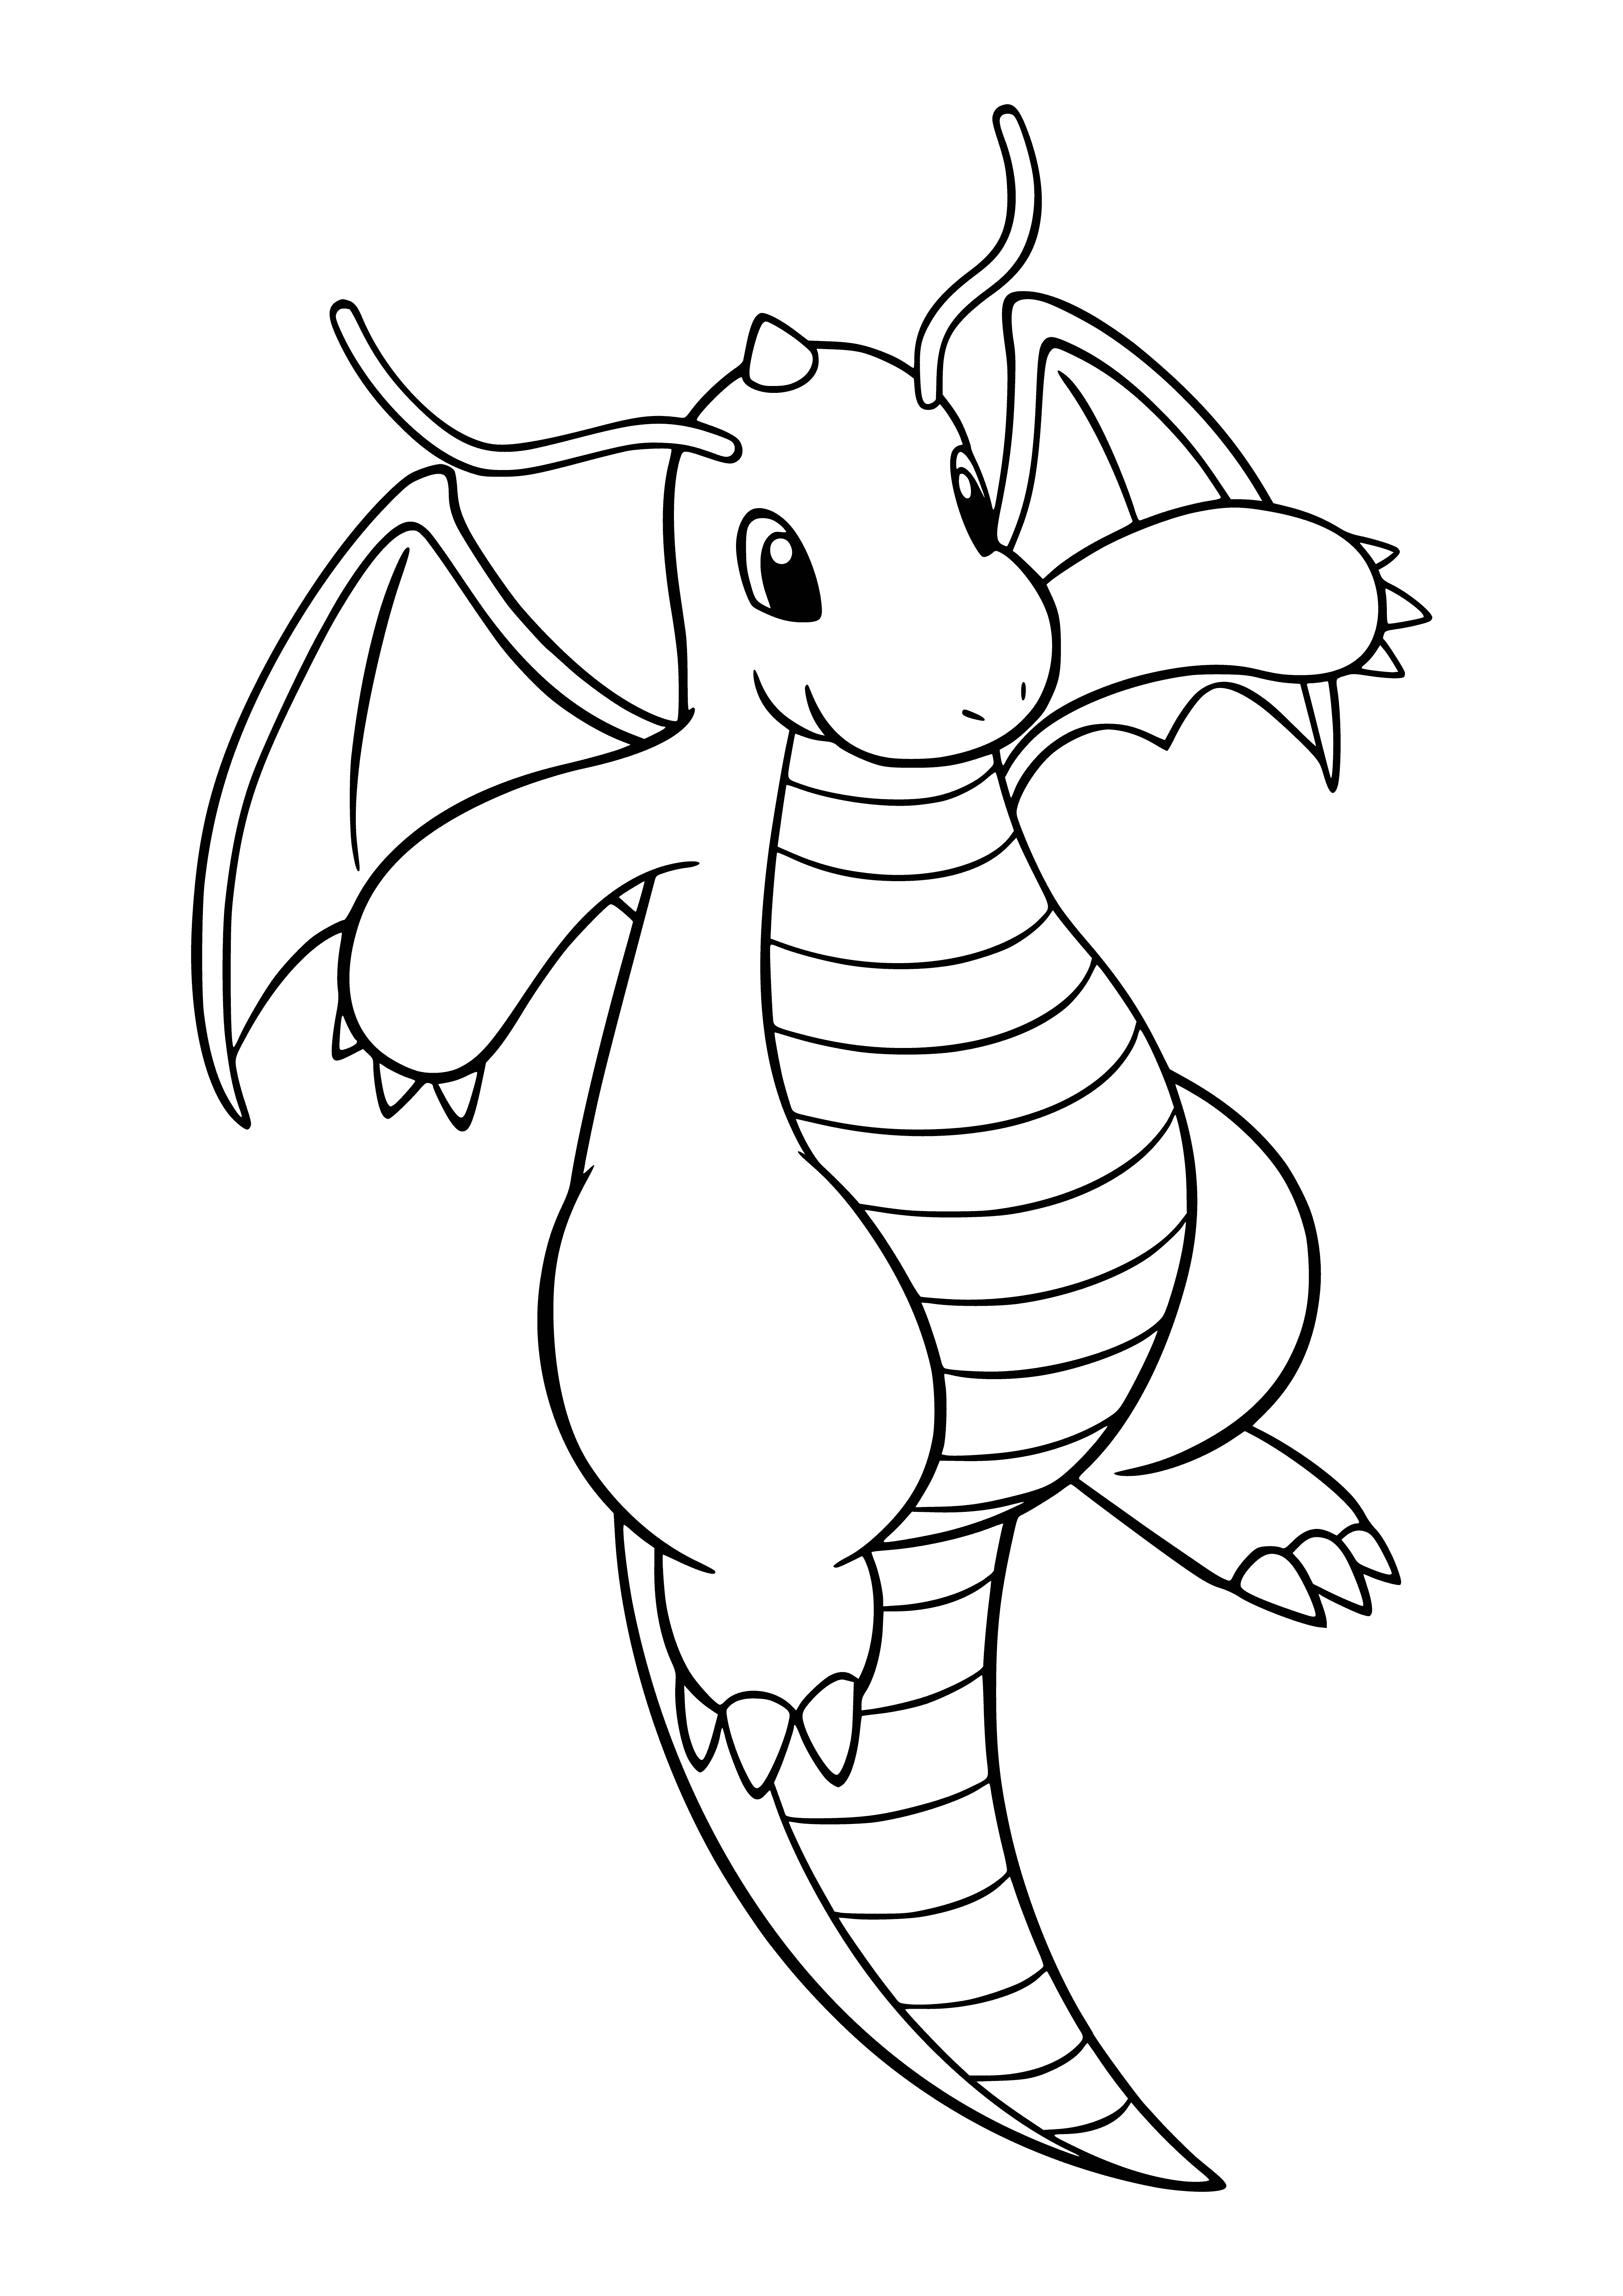 coloring page: Dragonite is a large, bipedal reptilian Pokemon w/drago wings, green skin, yellow belly, blue eyes, white wings w/blue spots, and small horns.